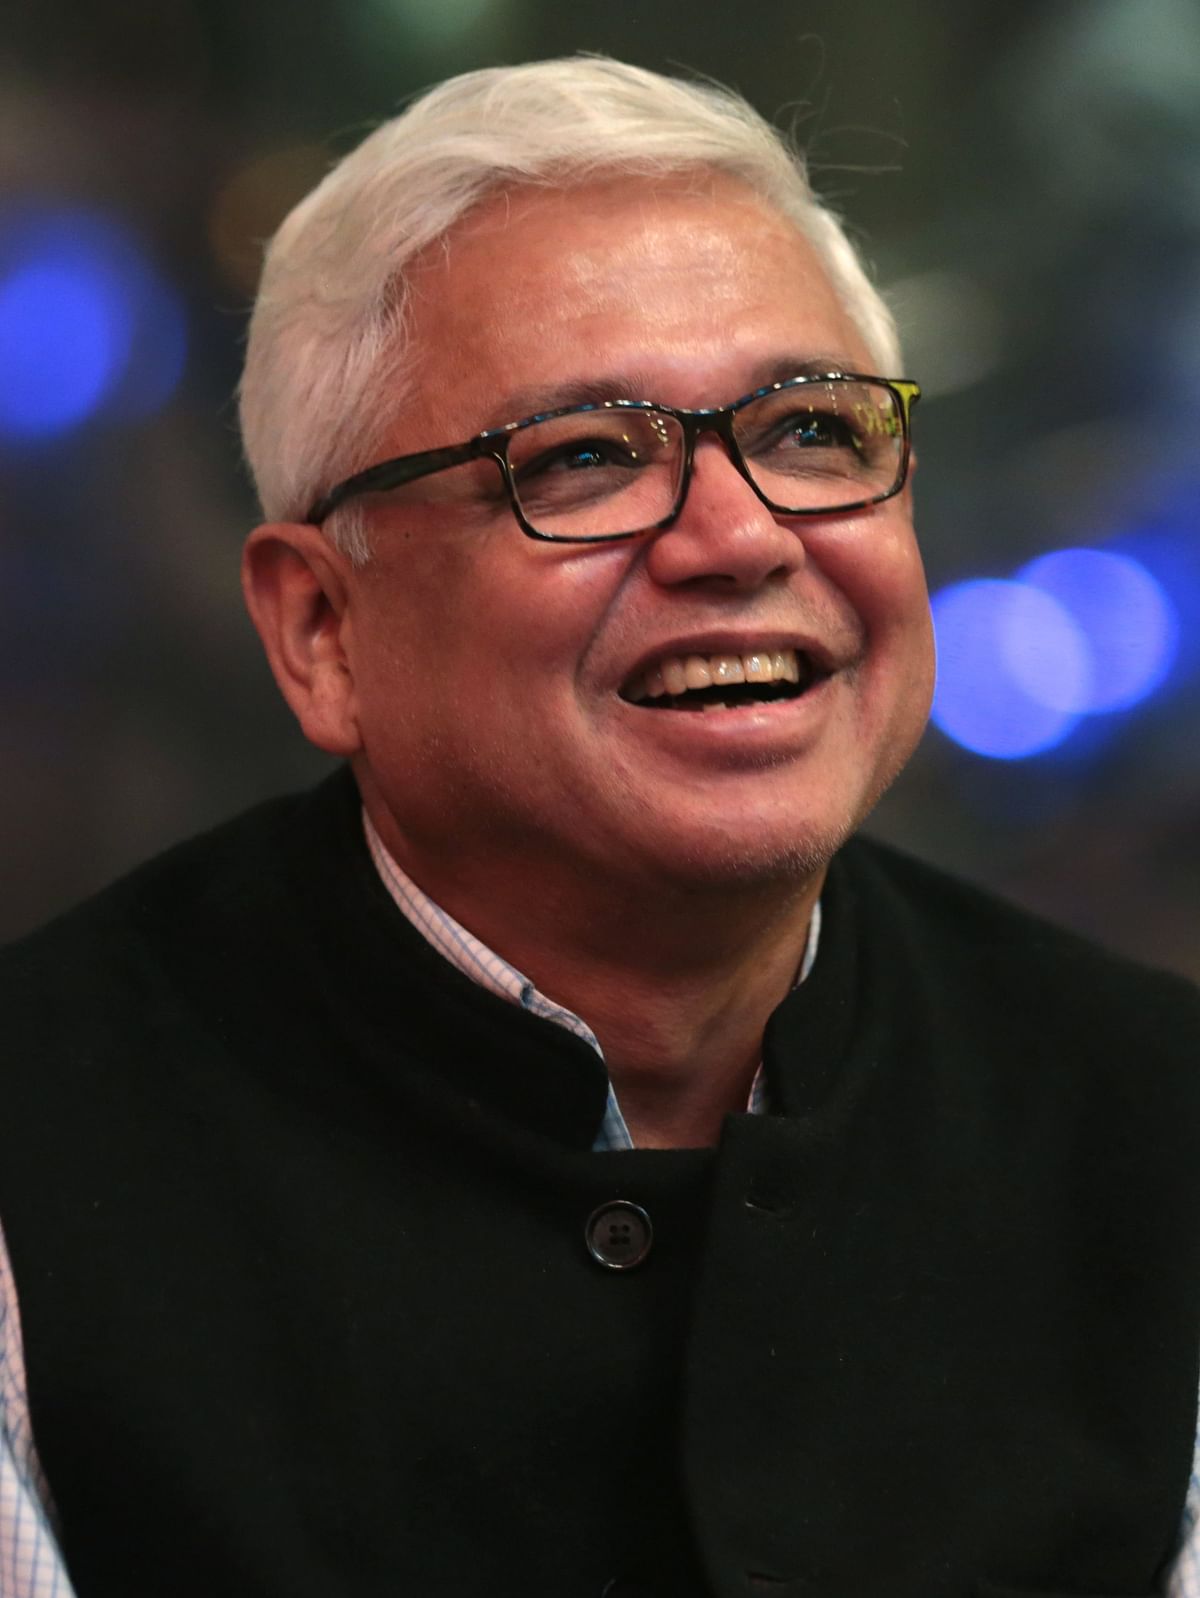 Country's political system not prepared to accept reality of climate change: Amitav Ghosh